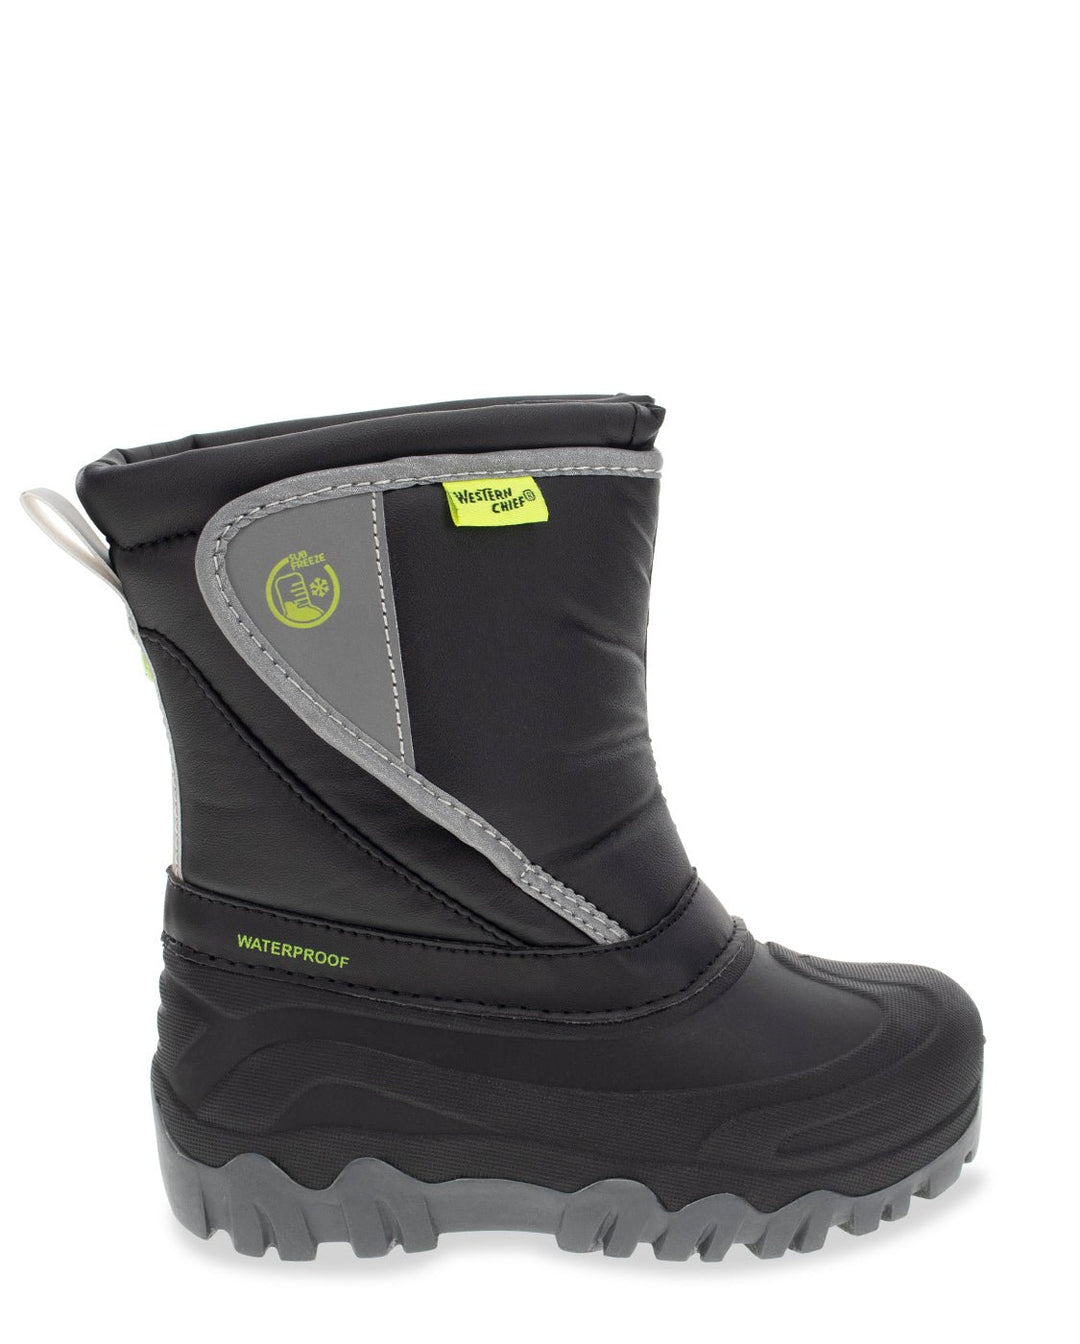 Kids Selah Cold Weather Boot - Black - Western Chief